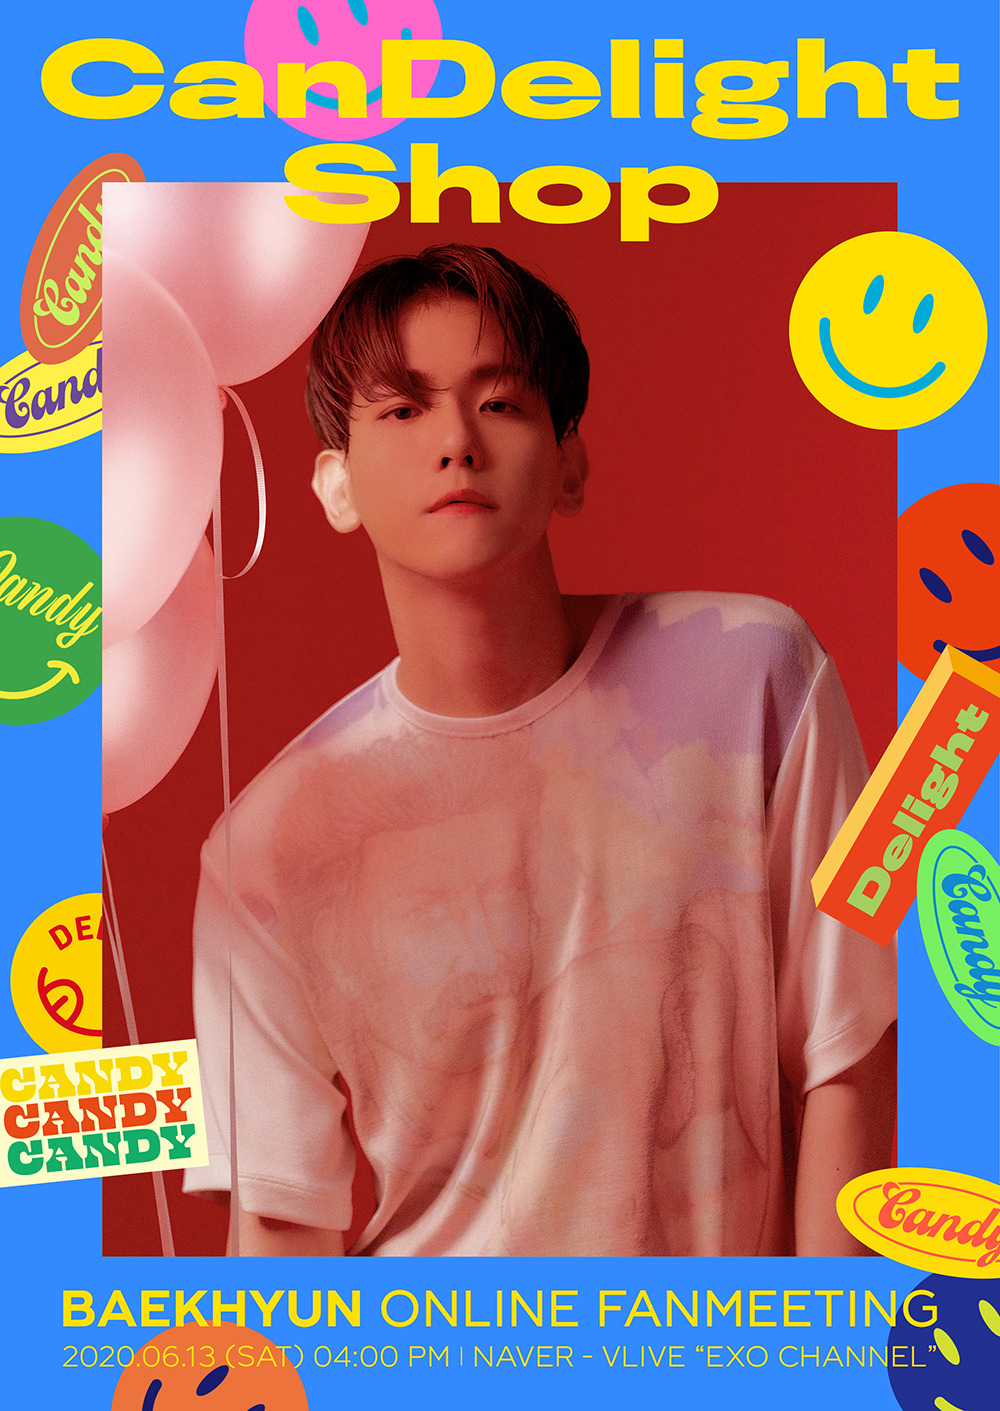 Seoul=) = EXO Baekhyun spends sweet time with fans with ransom fan meetingBaekhyun will host an online fan meeting Bonnie Wright Shop (CanDelight Shop) on Naver V LIVE EXO channel at 4 p.m. on the 13th to commemorate the release of the second Mini album Delight.Especially in this fan meeting, Baekhyun tells various stories such as recent talk, Q & A with a sense of humor, and it is expected to be a comprehensive gift set that can feel the infinite charm and fan love of Baekhyun by foreshadowing pleasant communication such as looking at hashtags and surveys of fans.In addition, Baekhyun recorded the highest sales volume of Solo albums in the history of Gaon charts with this album, and not only swept the top of various music charts, but also the title song Candy (Candy) last week MBC every1 show!Champion , KBS 2TV Music Bank , and SBS Popular Song .